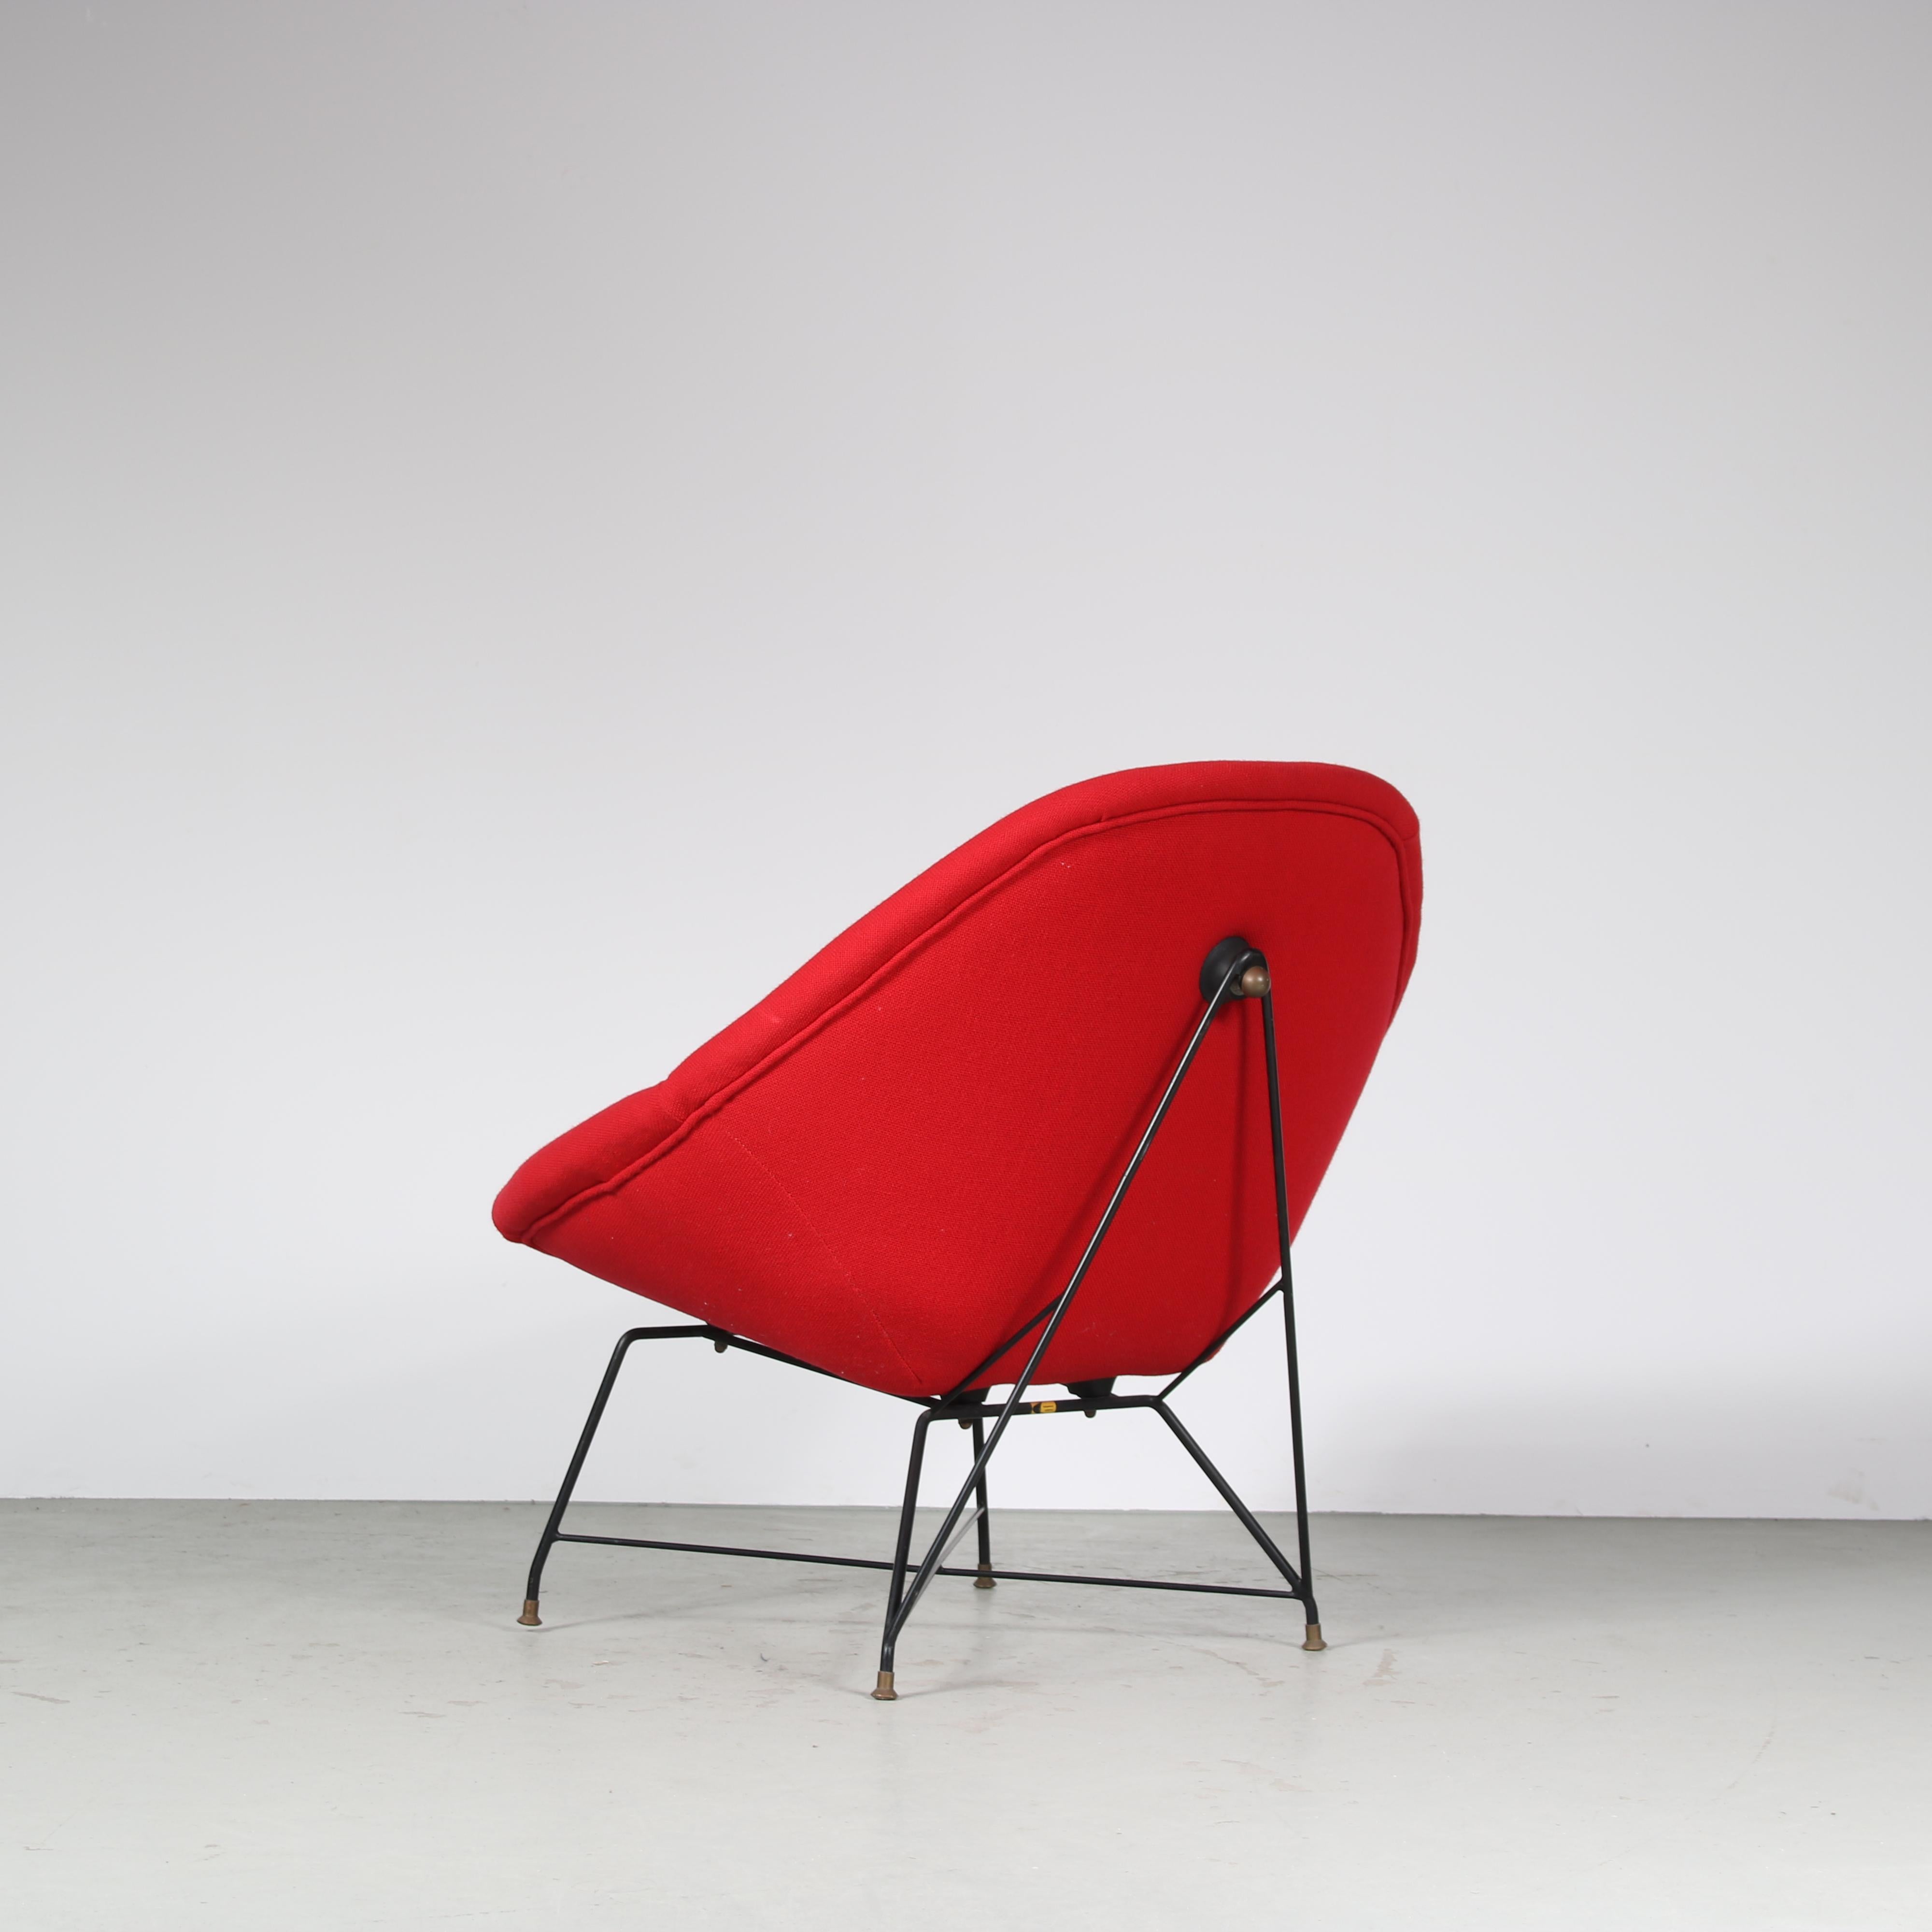 Mid-20th Century “Kosmos” Chair by Augusto Bozzi for Saporiti, Italy 1950 For Sale